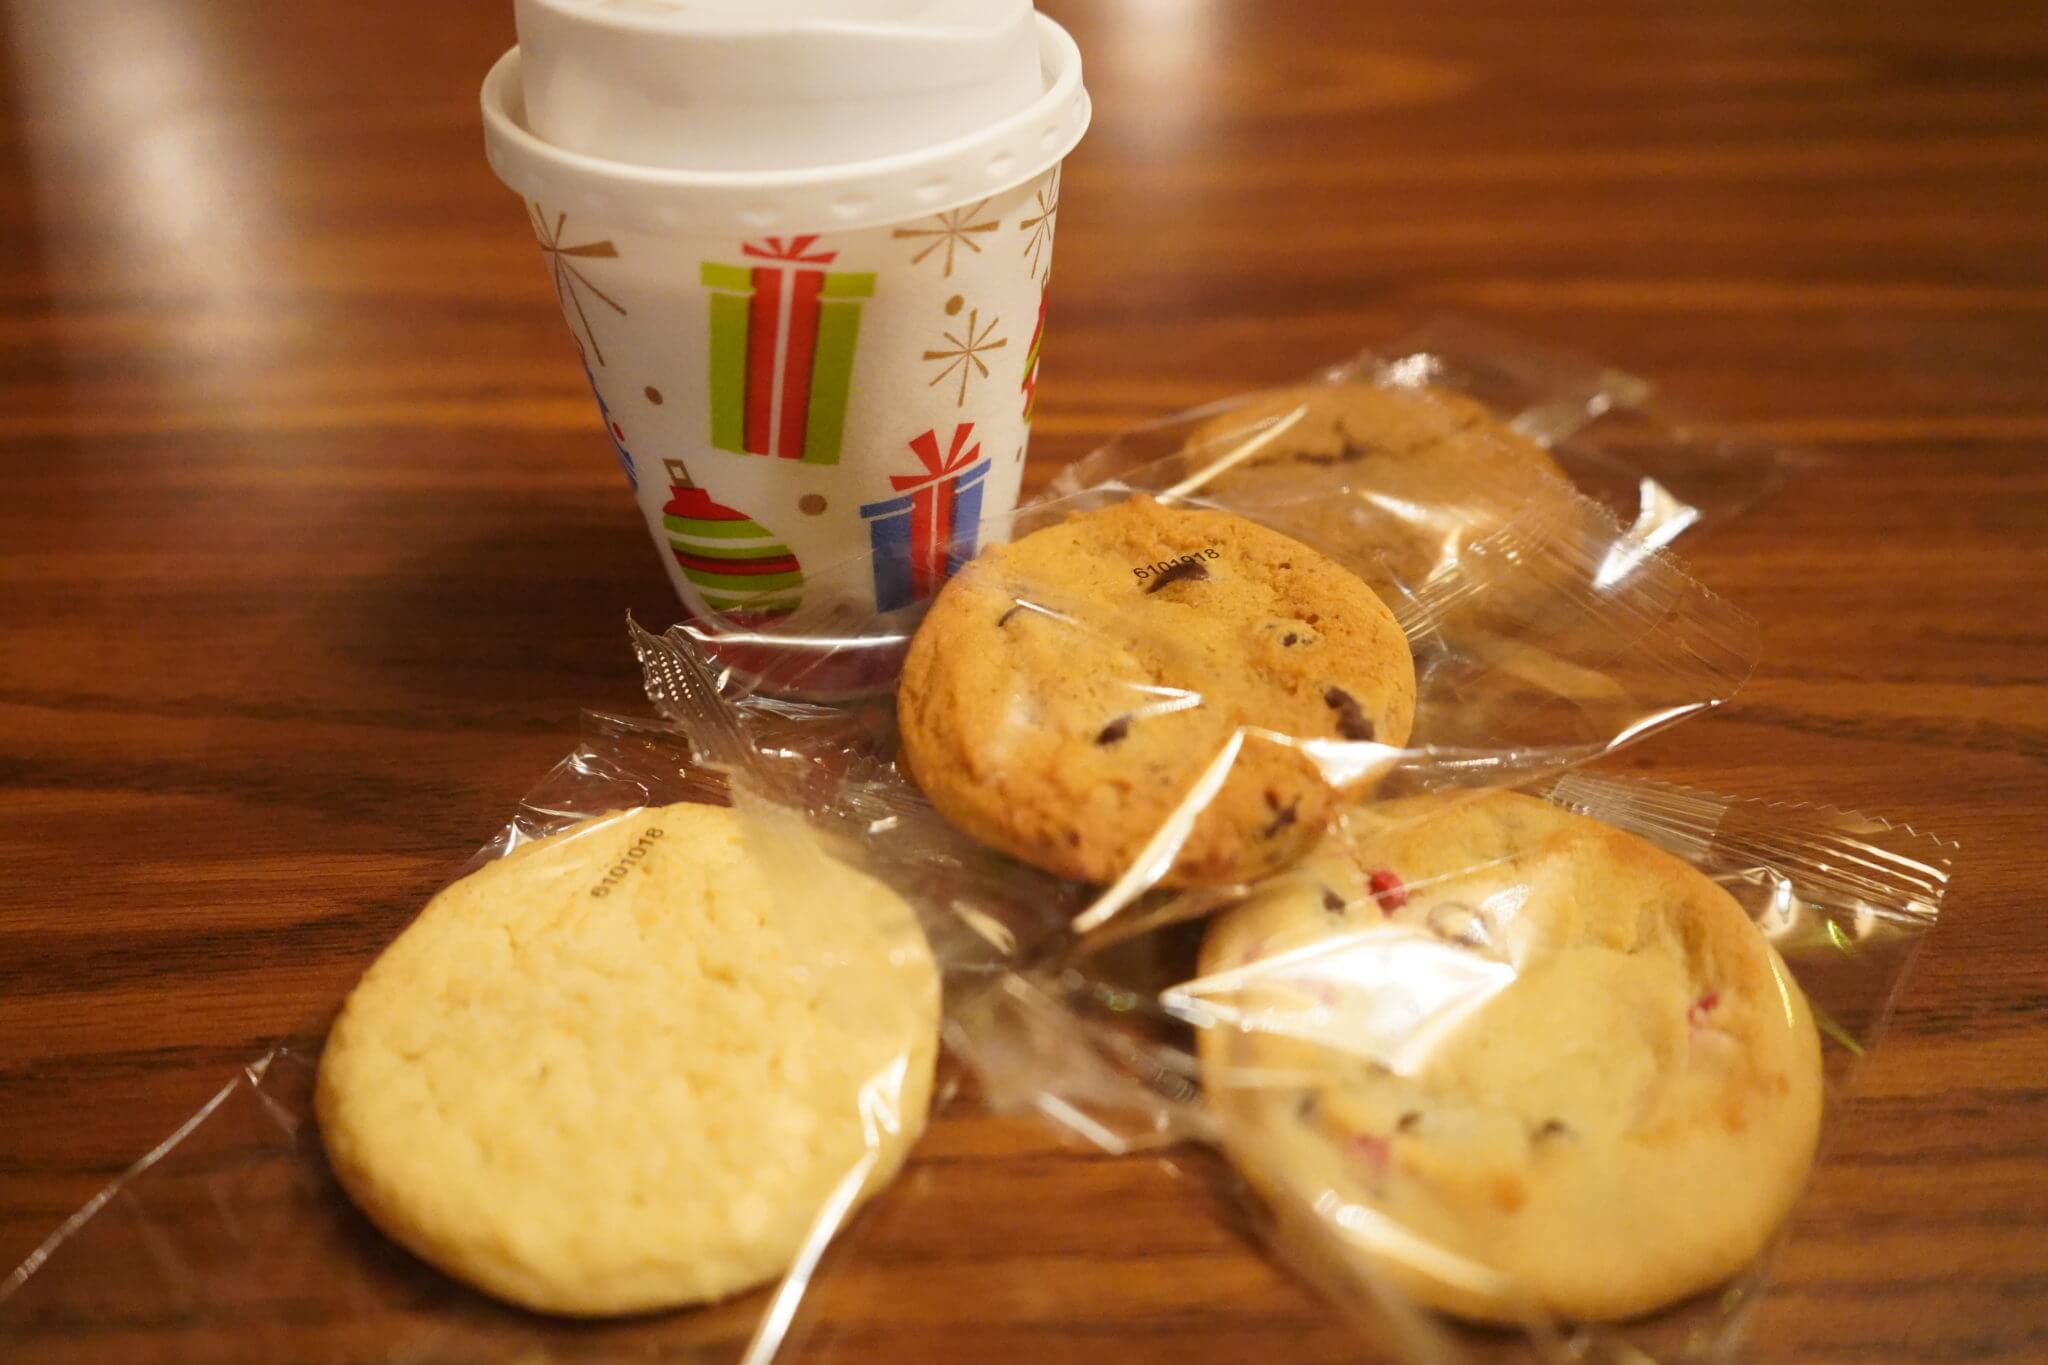 Free Cookies and Cocoa at Mickey's Very Merry Christmas Party in Disney World